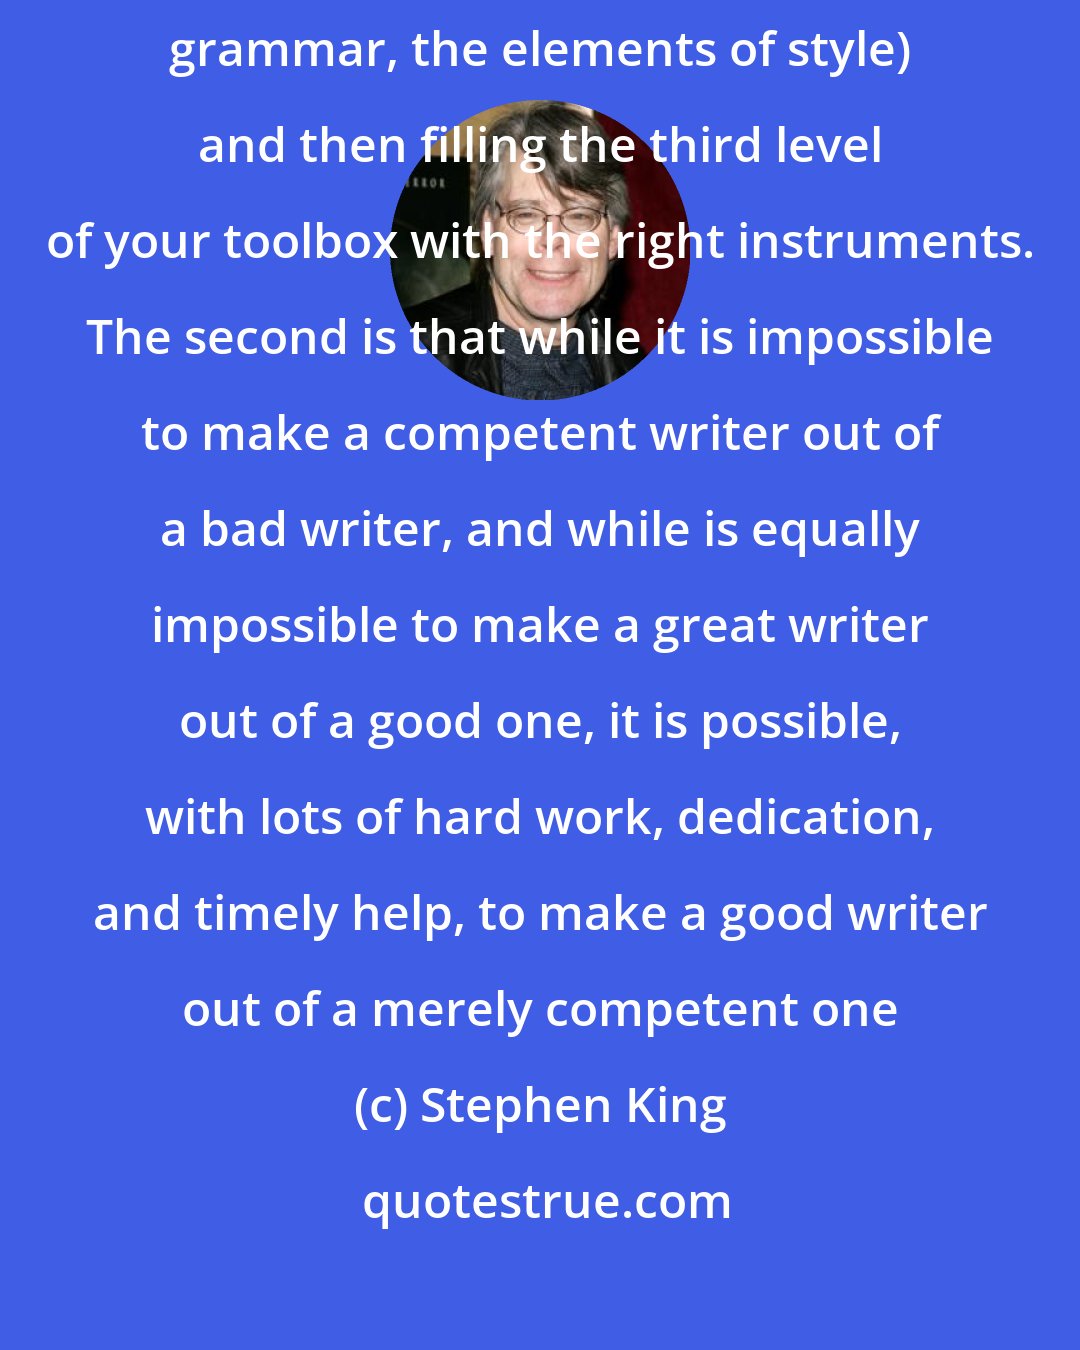 Stephen King: The first is that good writing consists of mastering the fundamentals (vocabulary, grammar, the elements of style) and then filling the third level of your toolbox with the right instruments. The second is that while it is impossible to make a competent writer out of a bad writer, and while is equally impossible to make a great writer out of a good one, it is possible, with lots of hard work, dedication, and timely help, to make a good writer out of a merely competent one